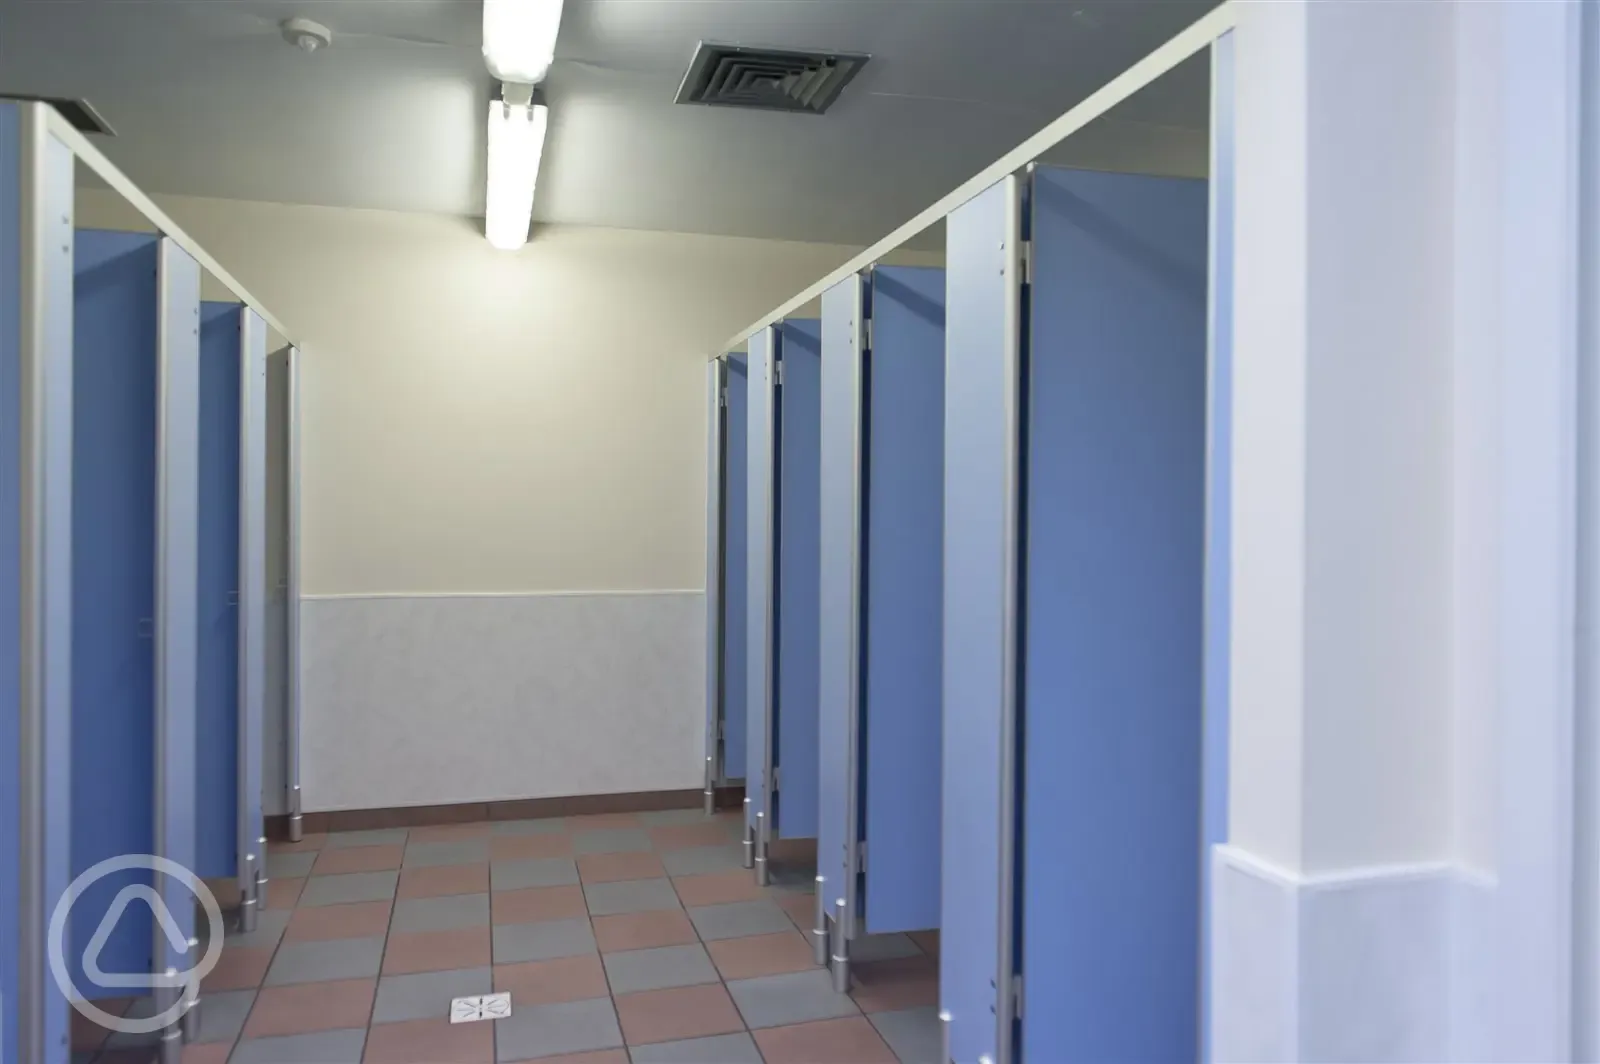 Clean and pleasant washrooms